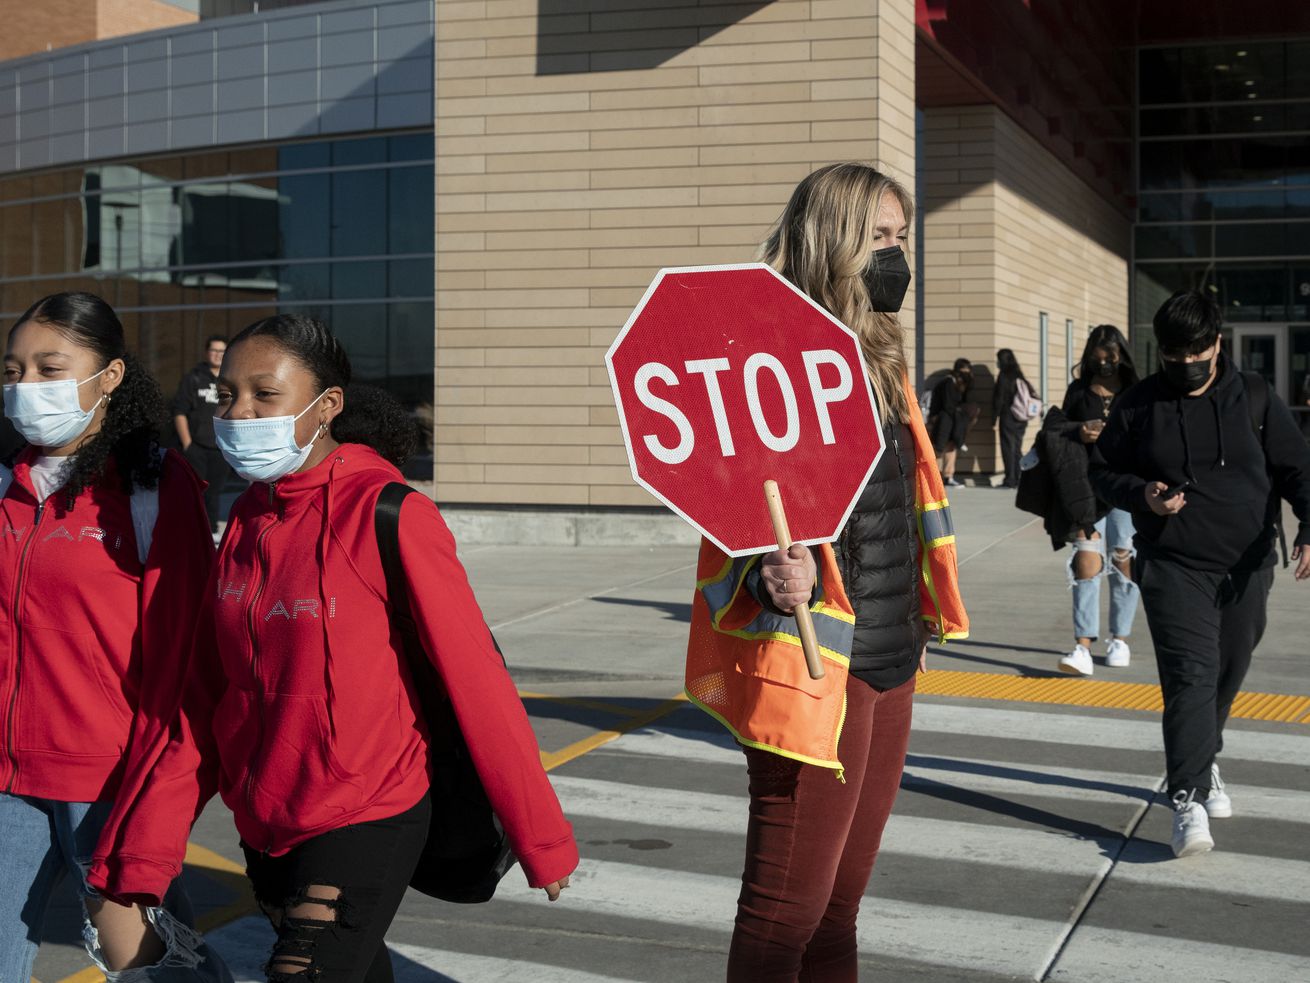 Students at Mount Jordan Middle School in Sandy wear masks on their way to school.